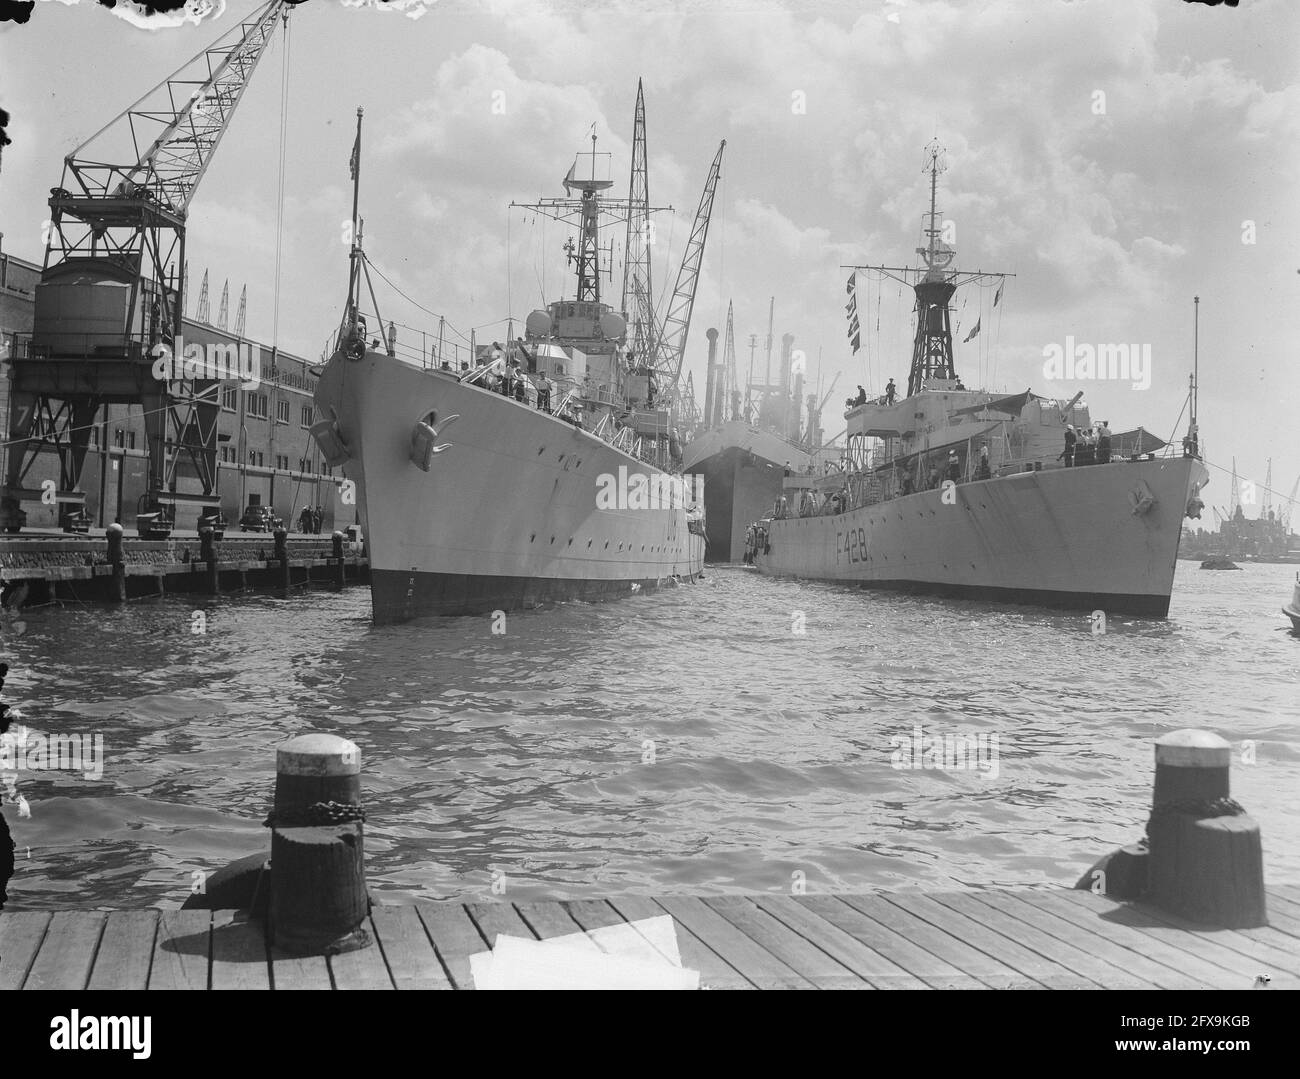 British torpedo boat jam St Kitts and British frigate Loch Alvie at Javakade, July 15, 1950, frigates, torpedo boats, The Netherlands, 20th century press agency photo, news to remember, documentary, historic photography 1945-1990, visual stories, human history of the Twentieth Century, capturing moments in time Stock Photo